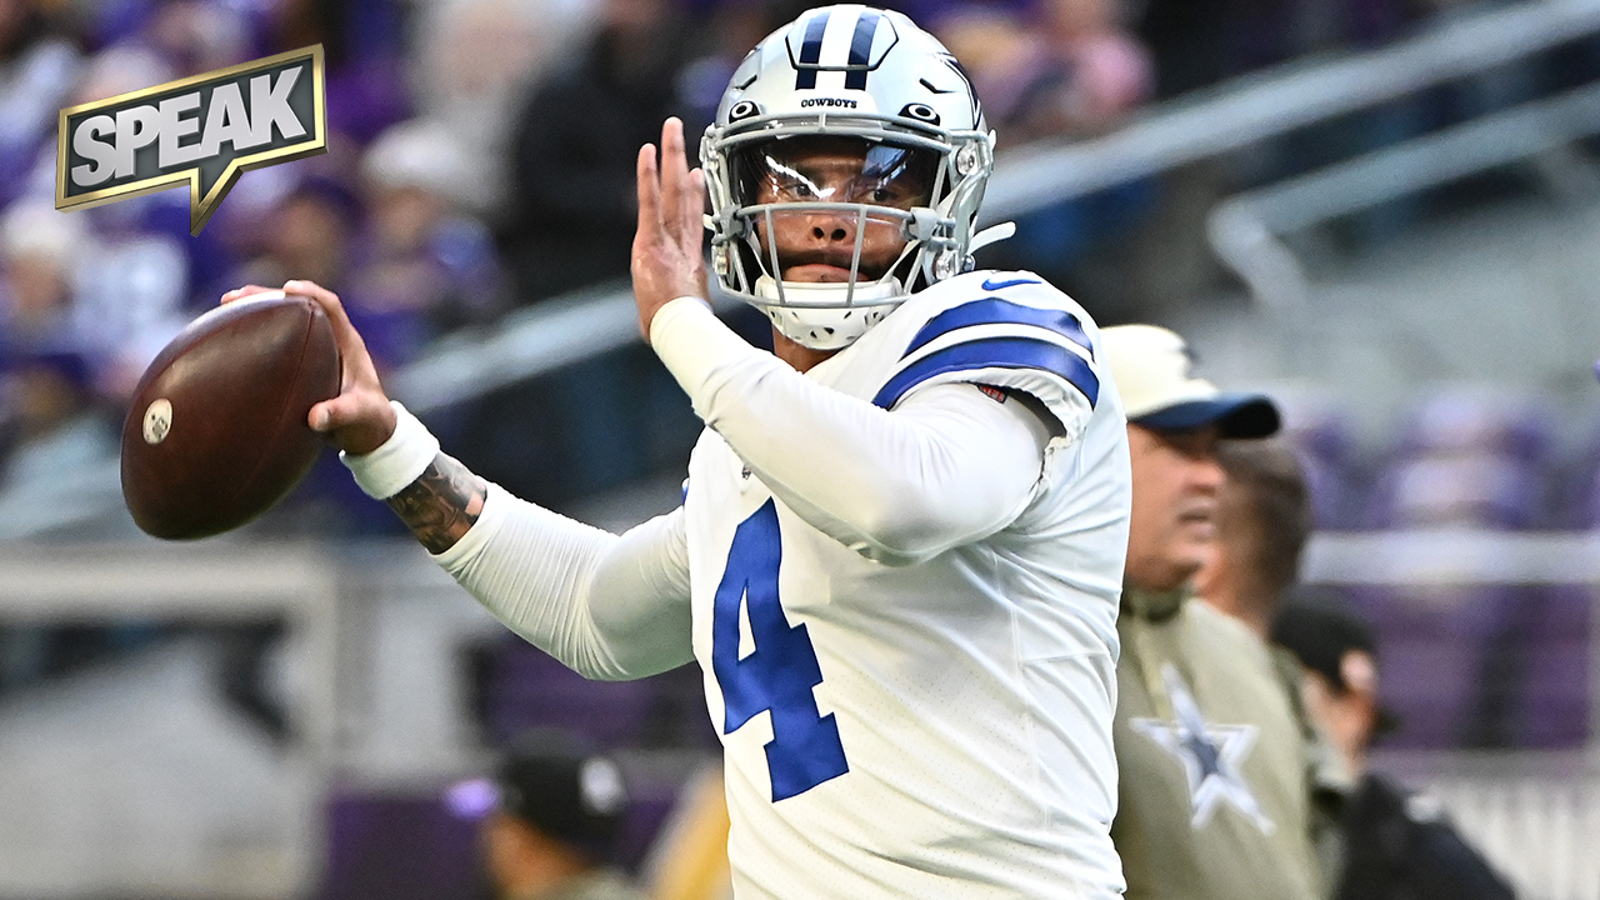 Did Cowboys put the NFC on notice after impressive 40-3 win over Vikings in Week 11? 